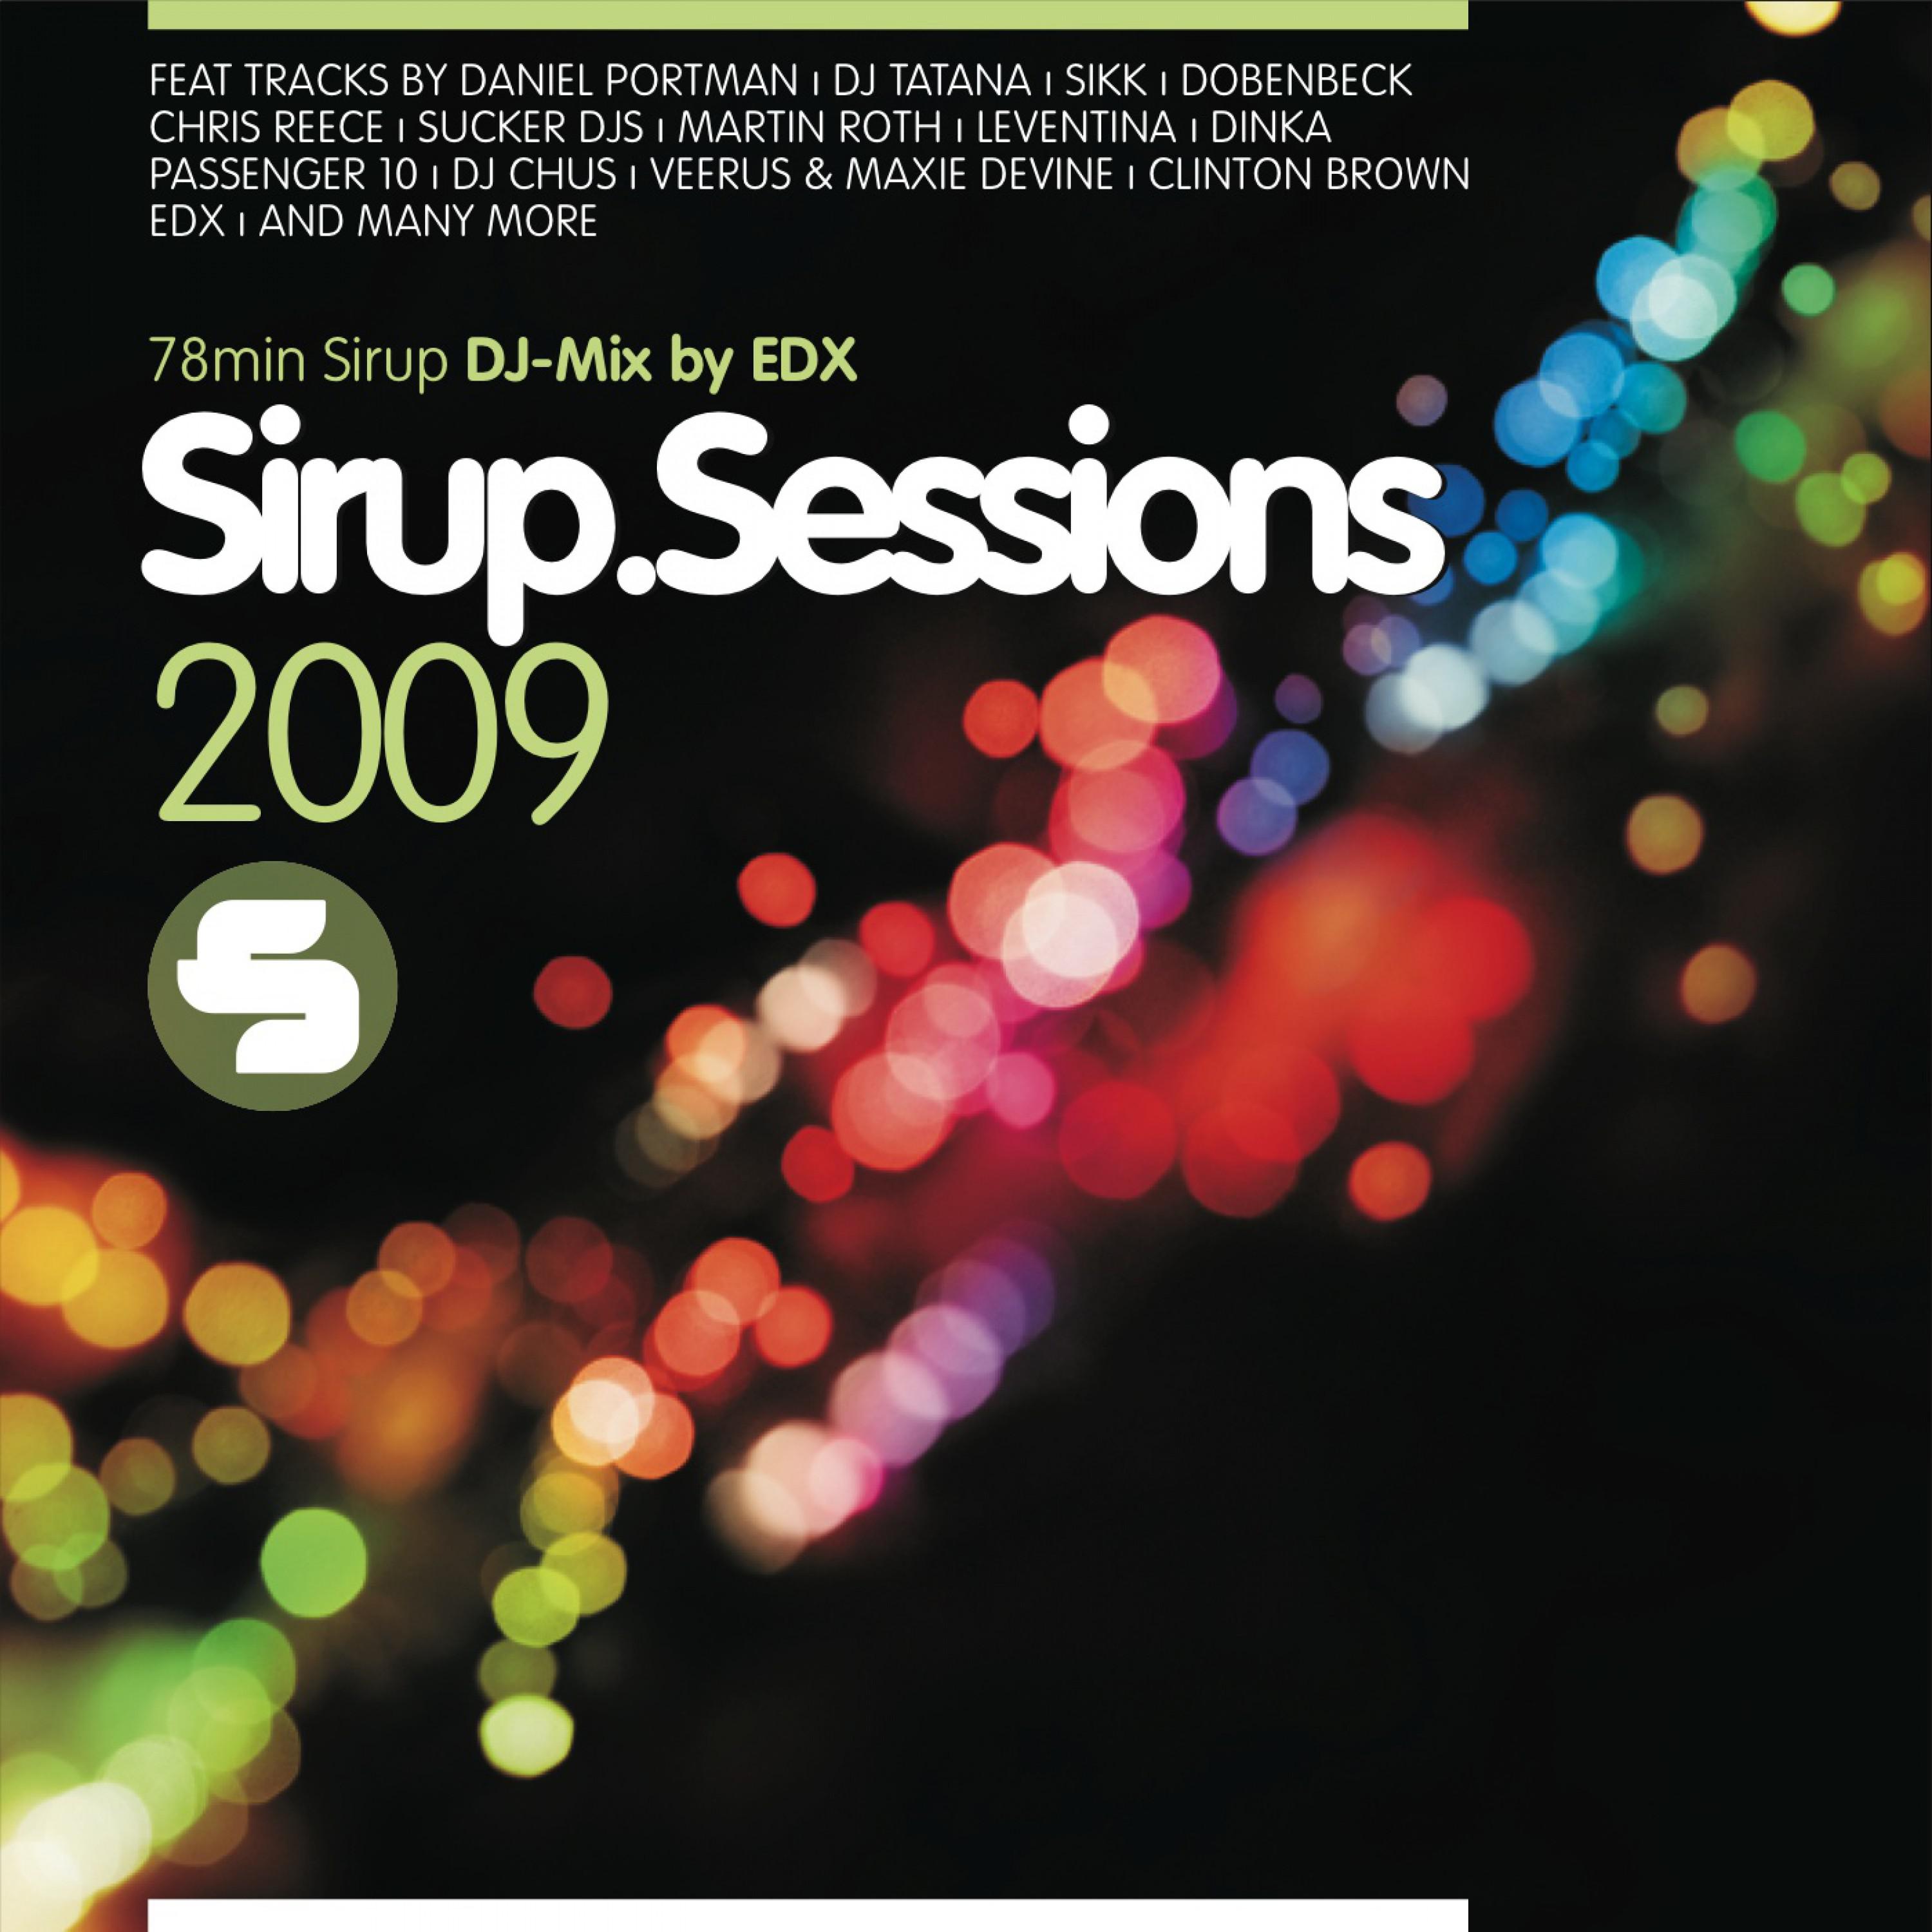 Sirup.Sessions (Full DJ Mix by EDX)